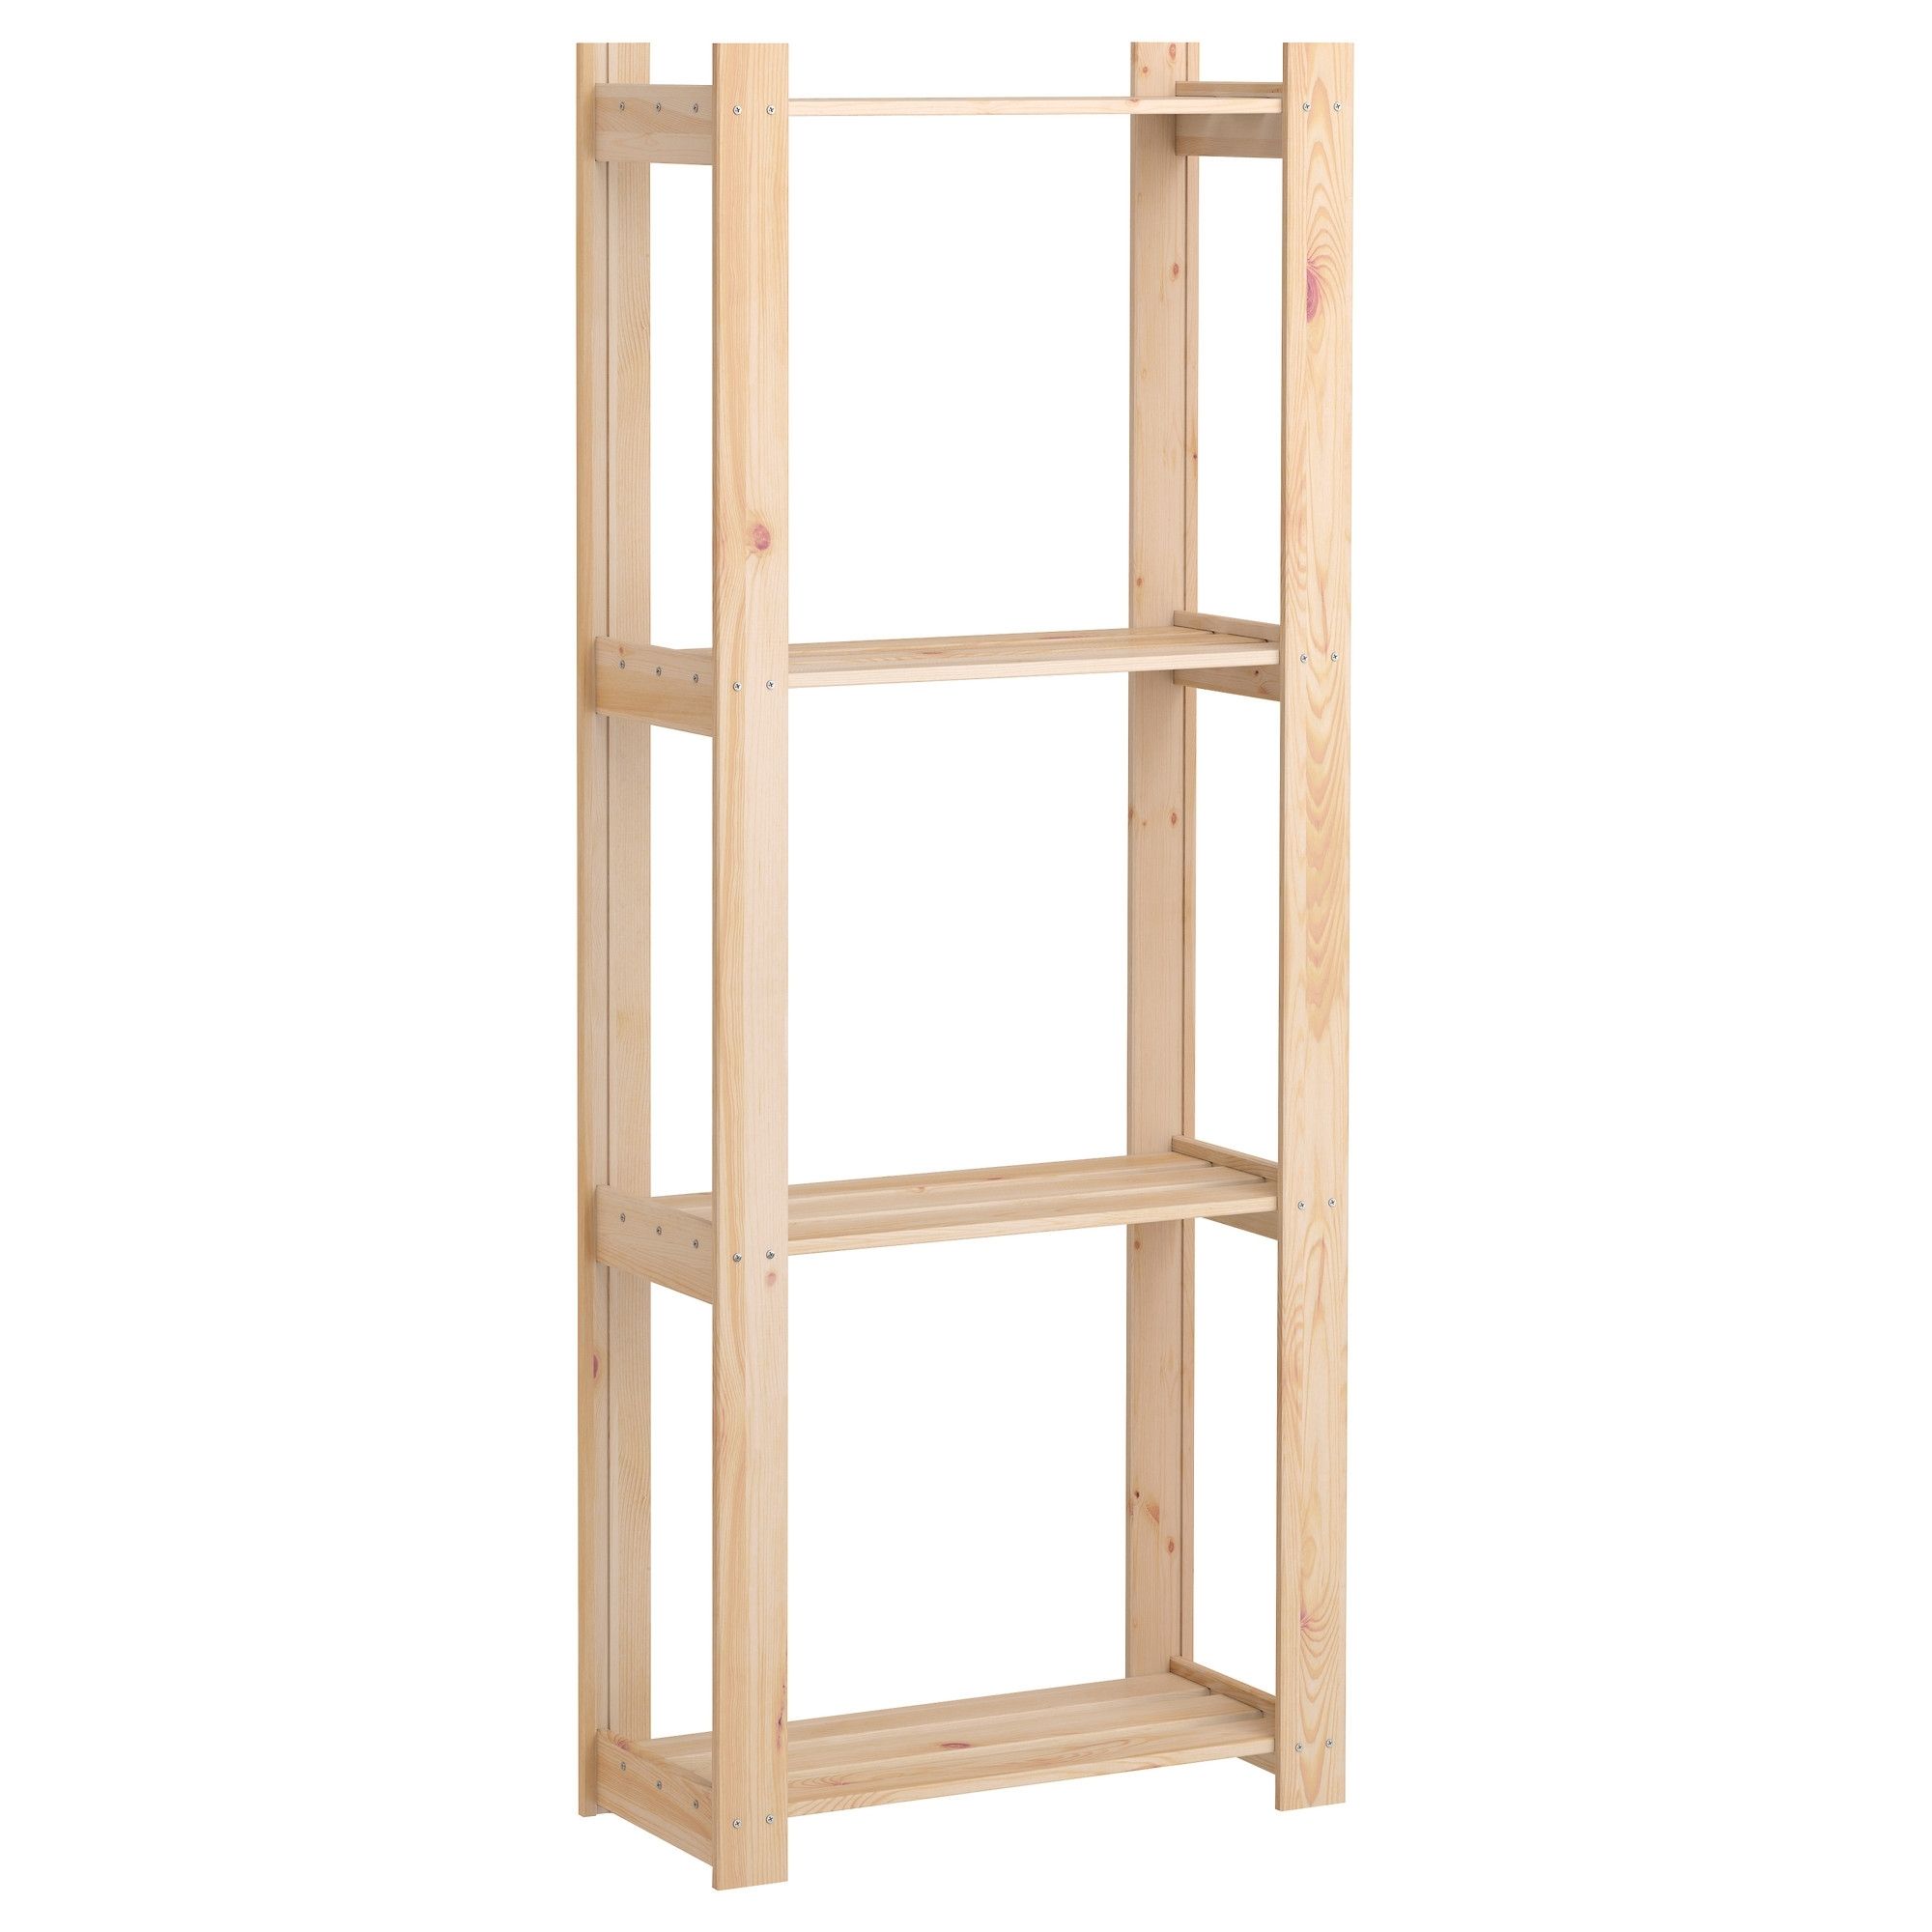 Popular Wooden Shelving Units In Albert Shelving Unit Softwood 64x28x159 Cm – Ikea (View 2 of 15)